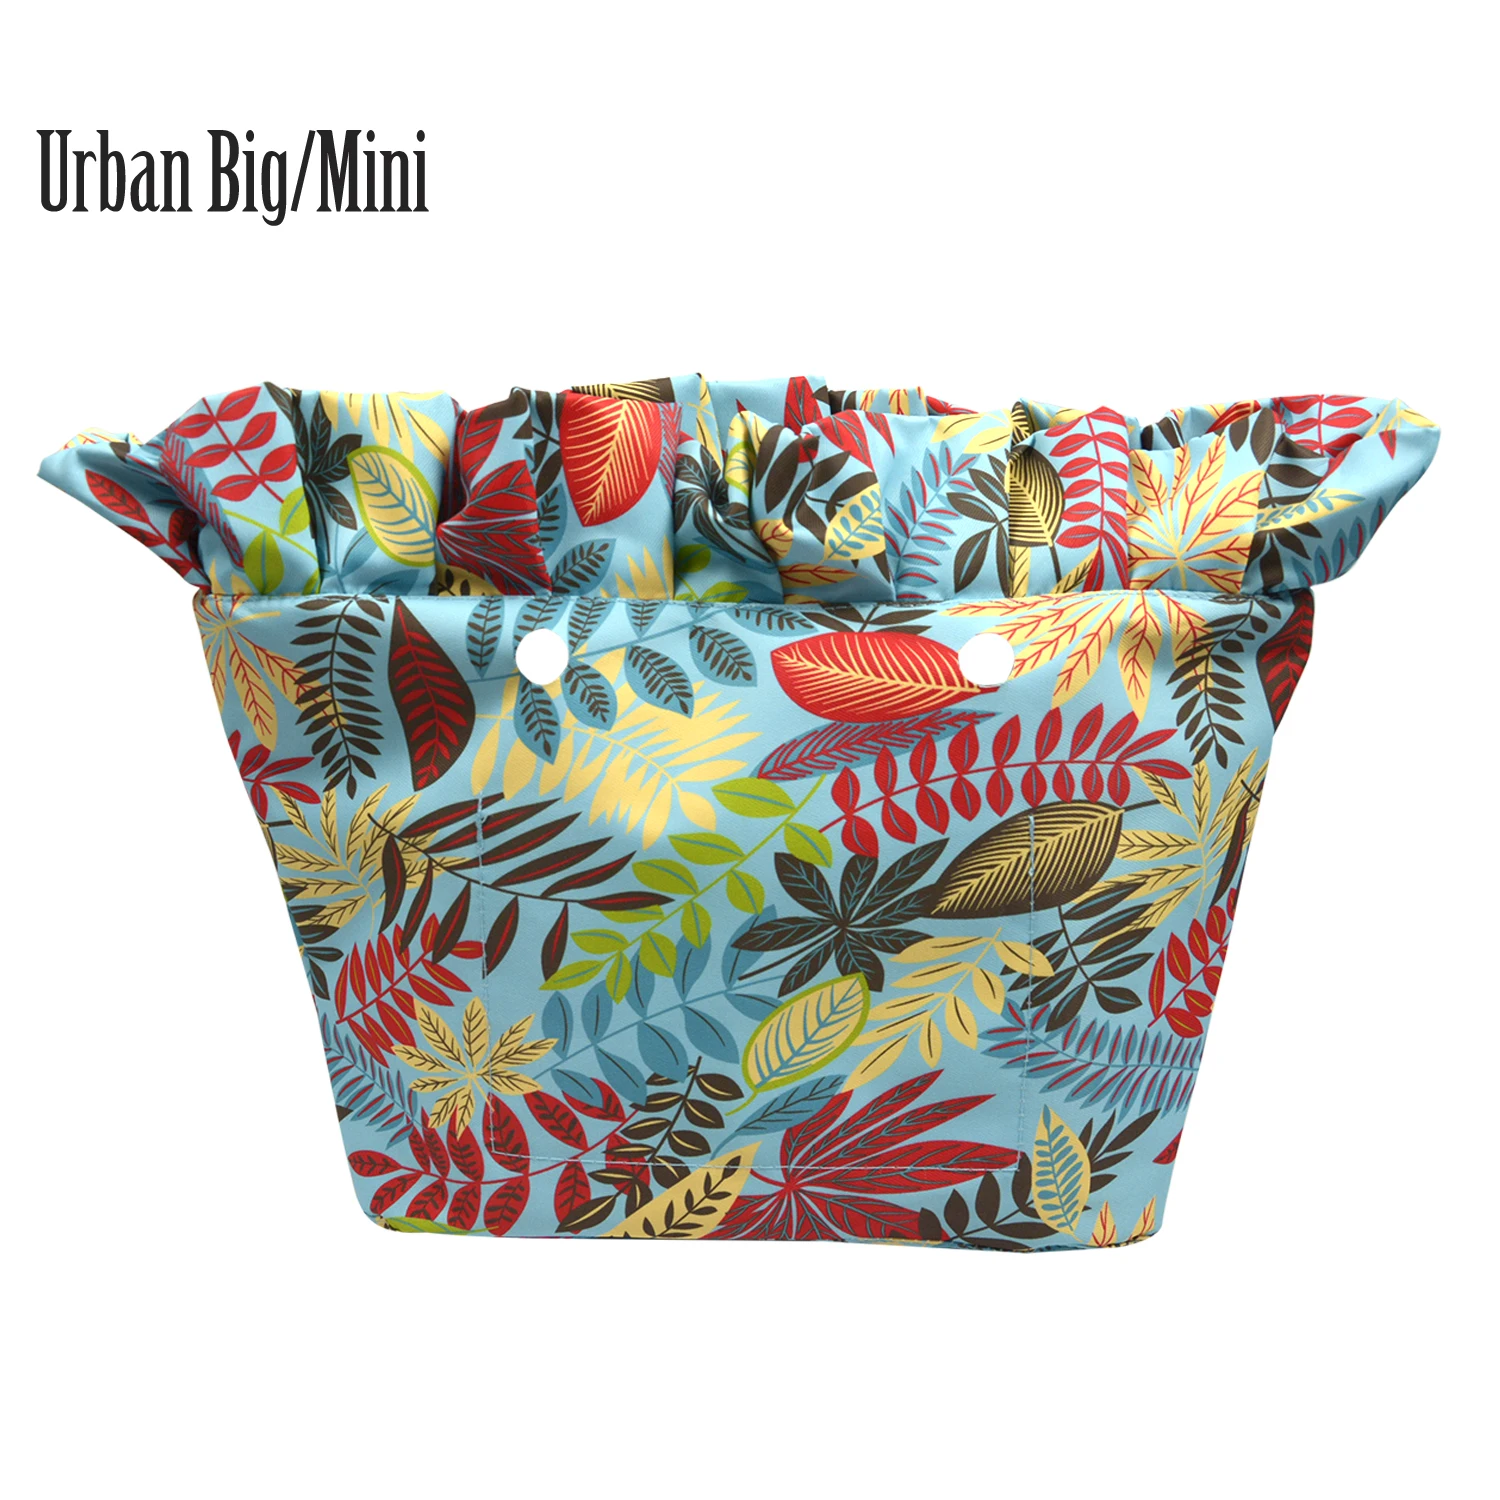 

2020 New Composite Twill Cloth Waterproof Frill Pleat Inner Lining Insert for Obag Urban mini for O Bag Urban big, Floral